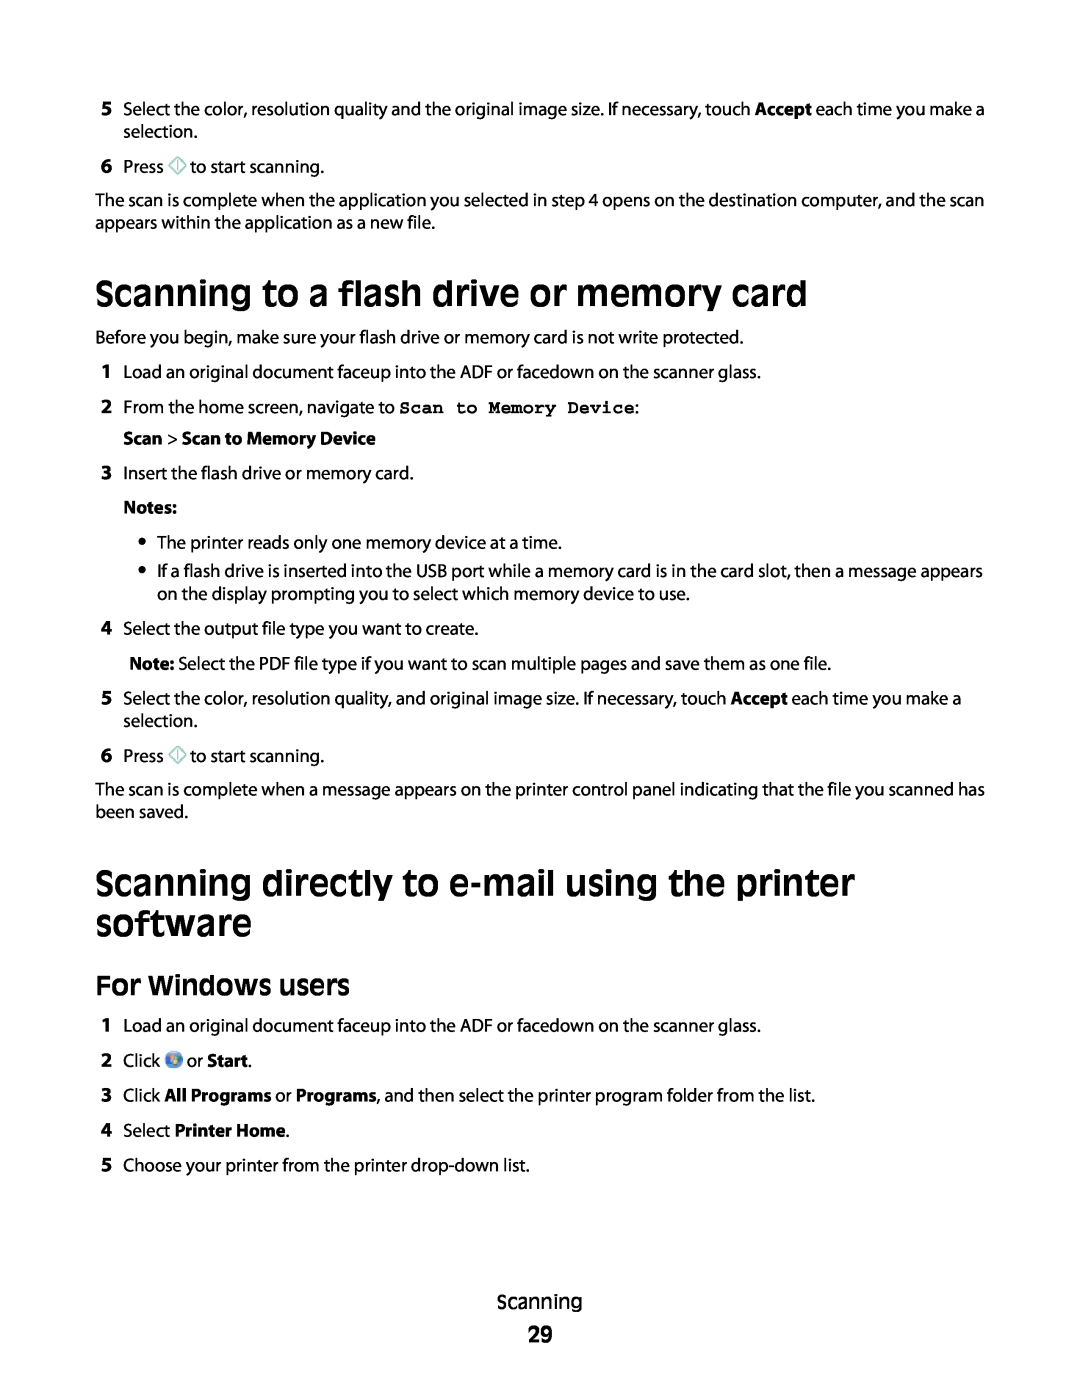 Lexmark S600 manual Scanning to a flash drive or memory card, Scanning directly to e-mail using the printer software 